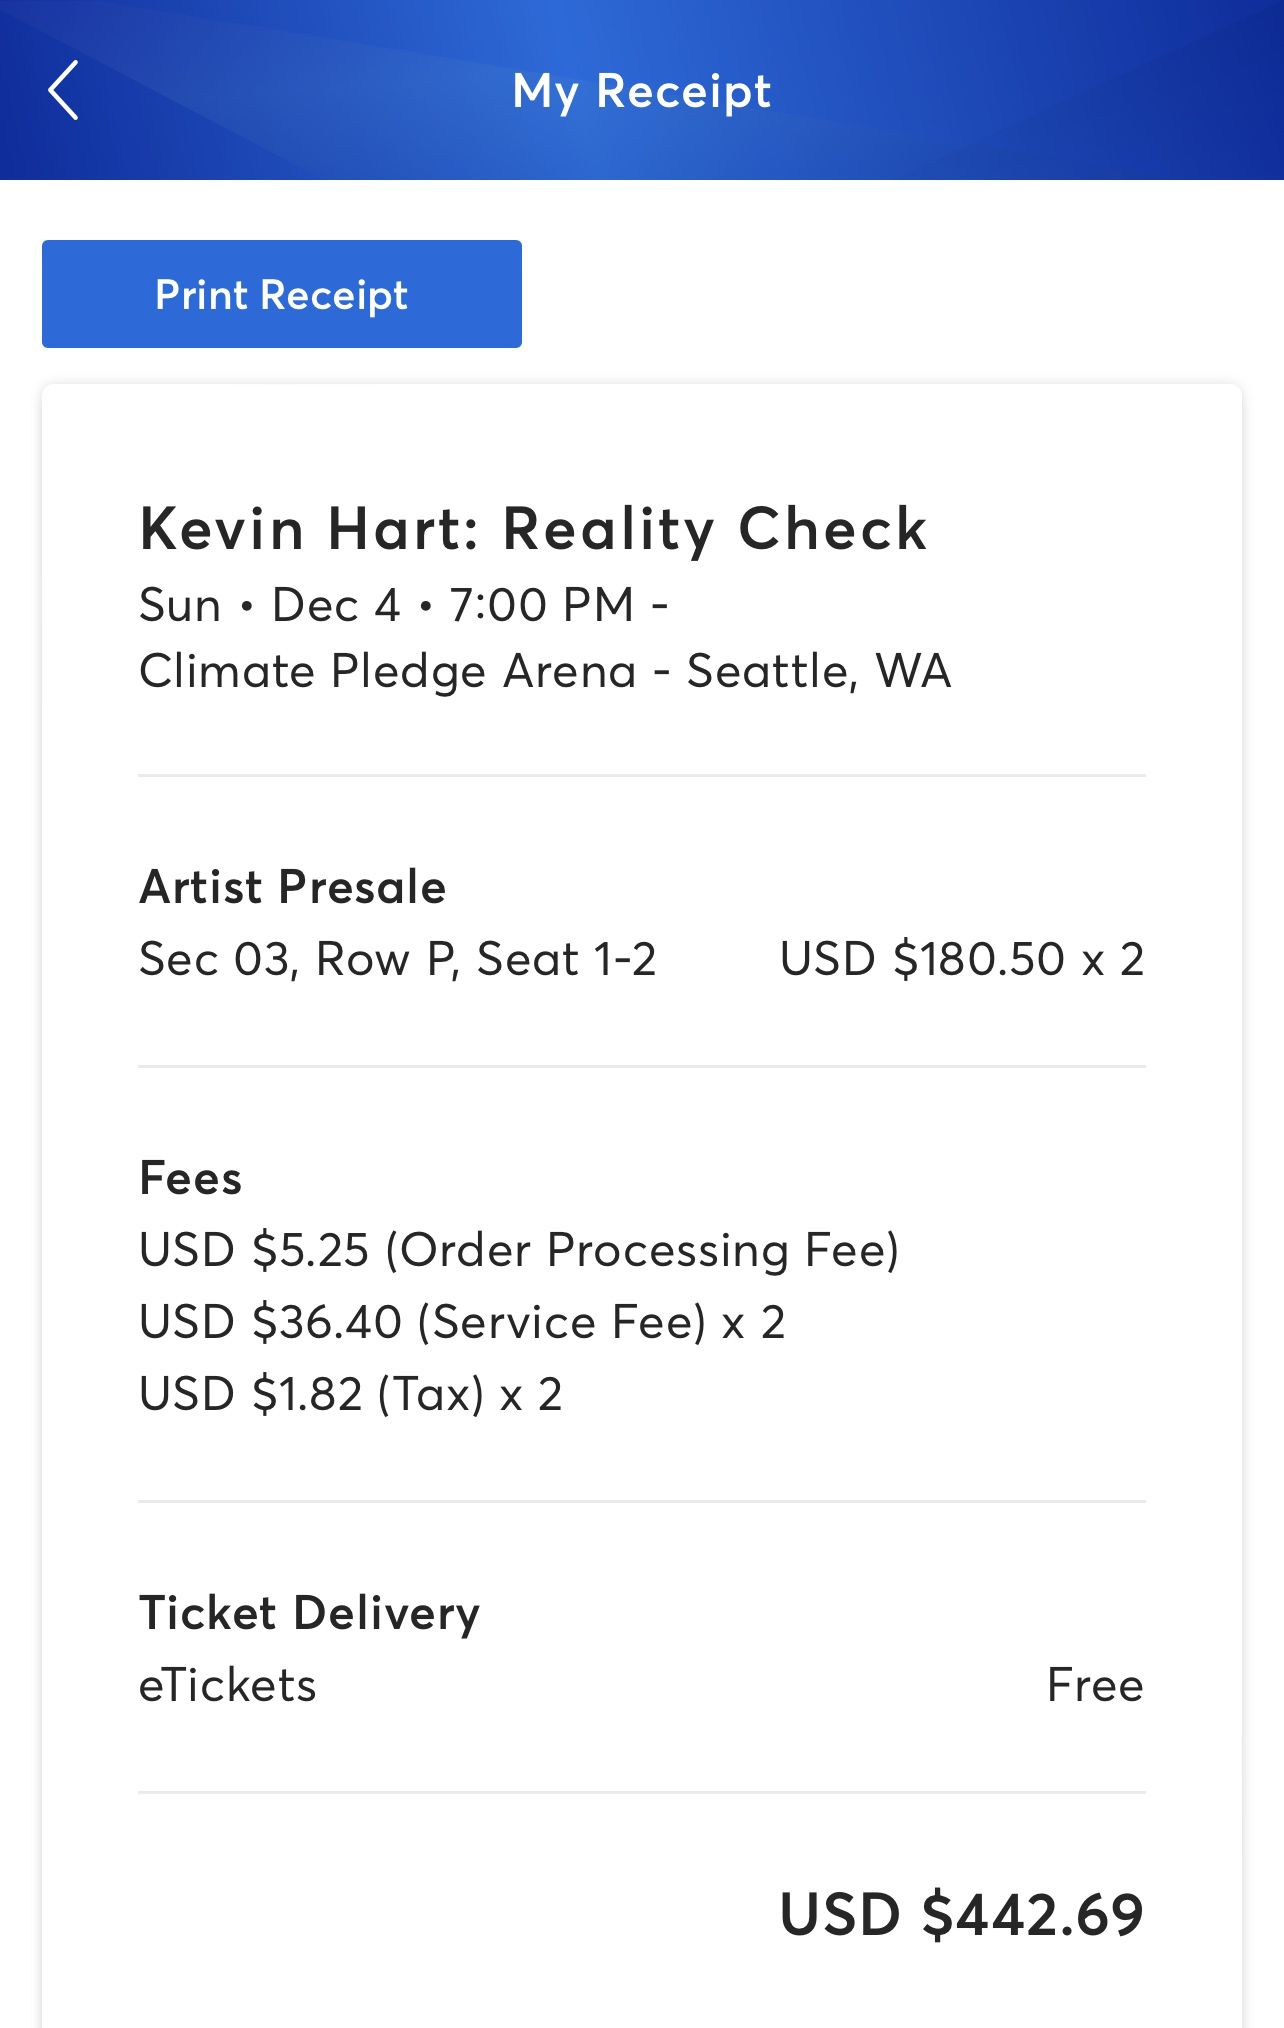 Kevin Hart - Sunday Dec 4 Section 3- On Vacation, Can’t Go!! 😭